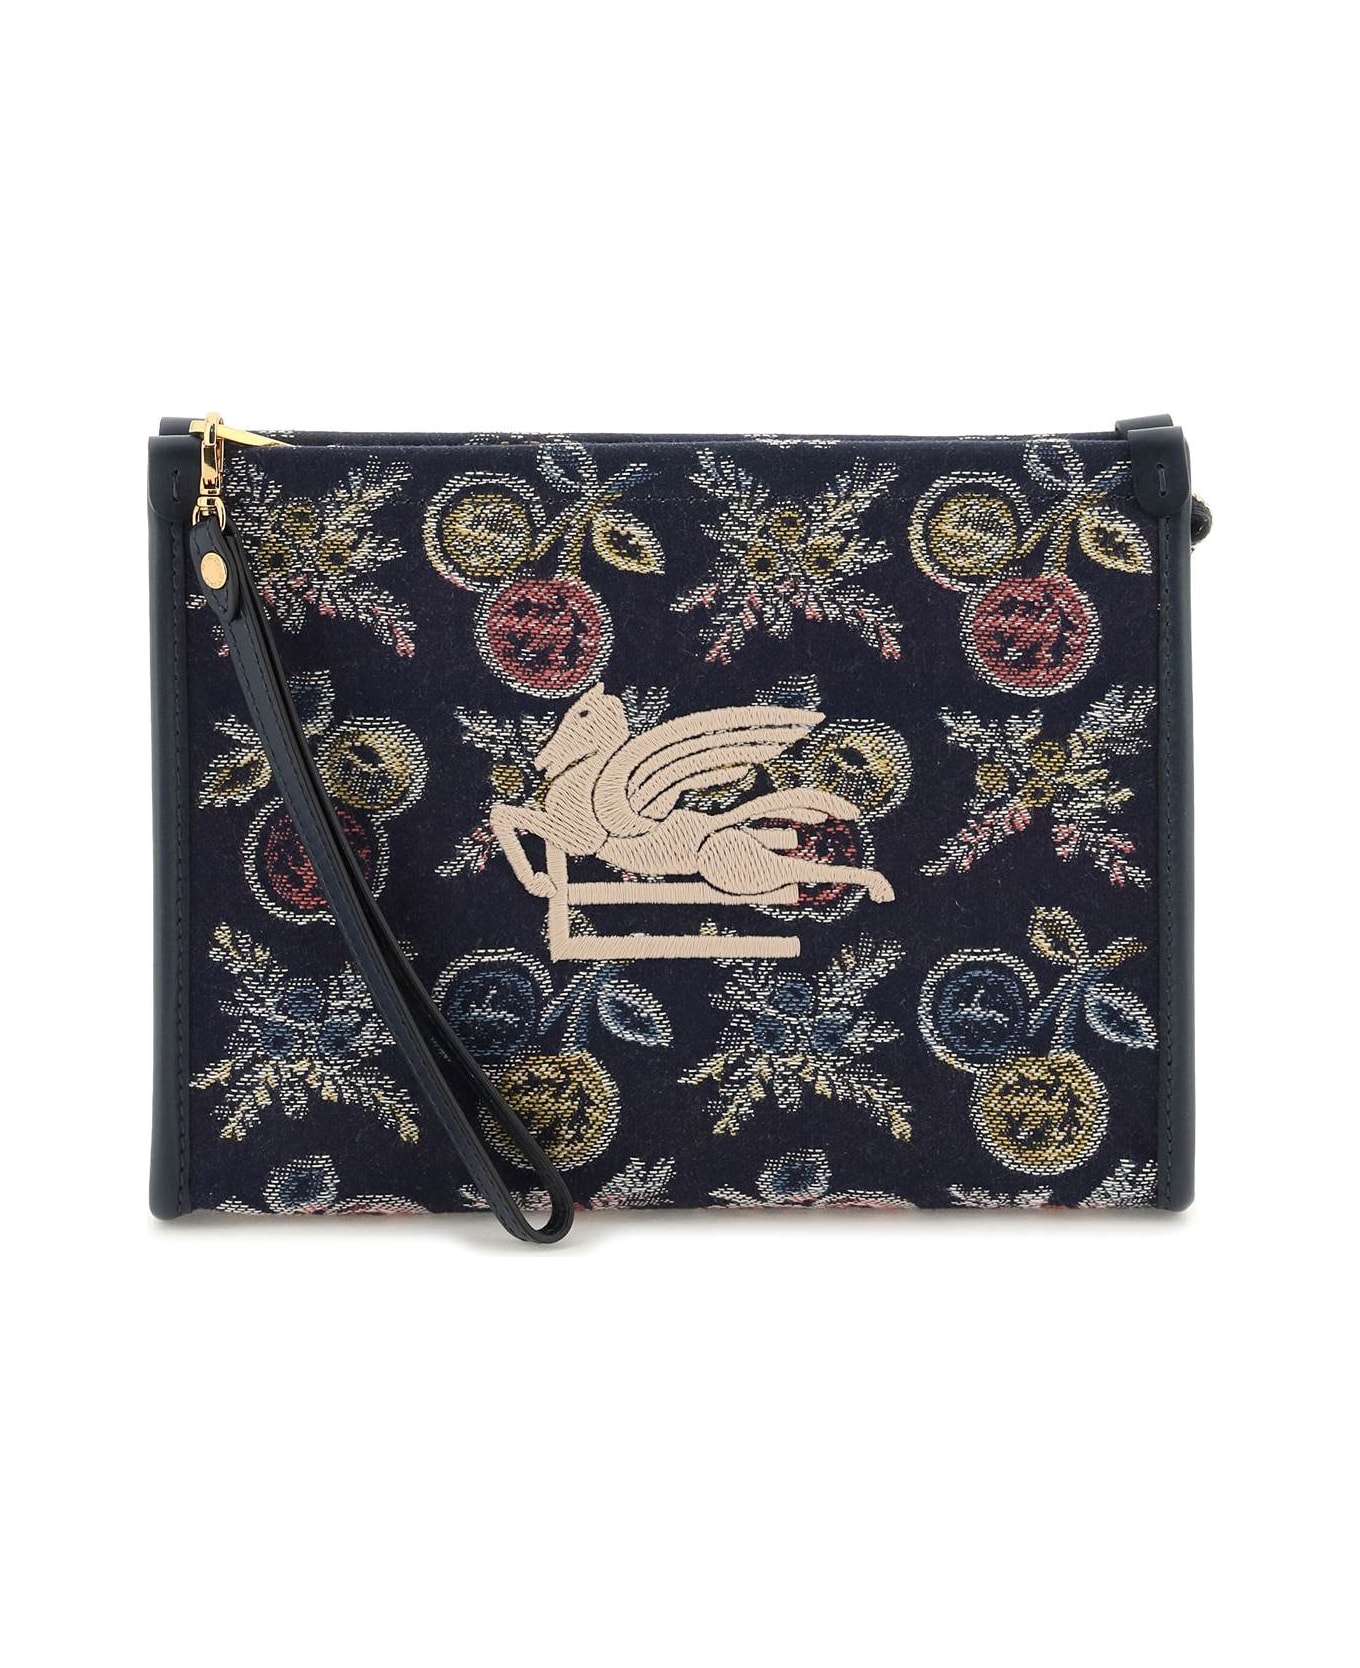 Etro Jacquard Apples Pouch - BLUE (Blue) クラッチバッグ